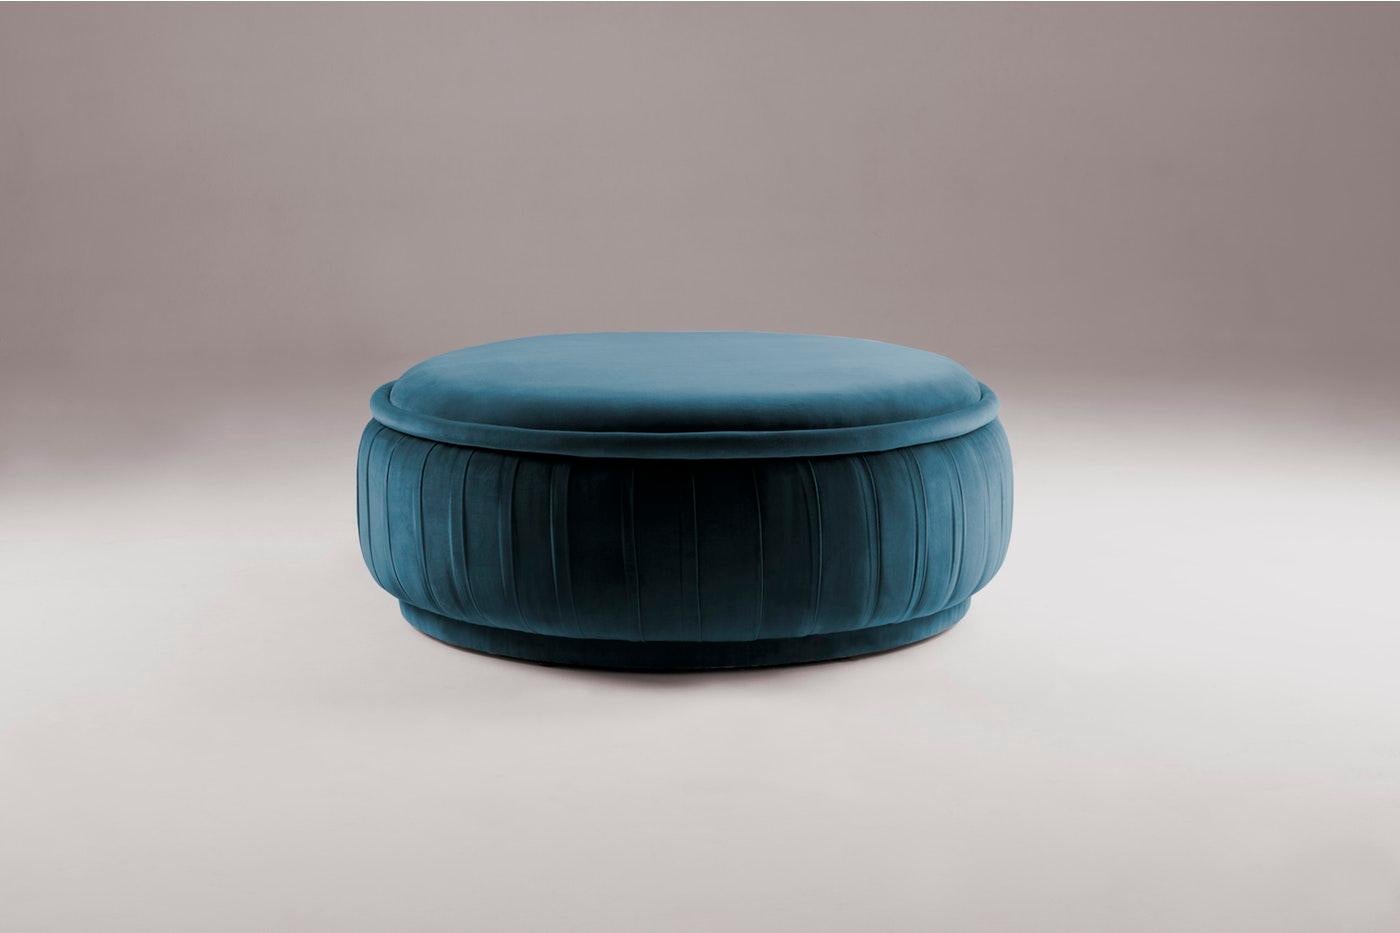 Malibu Pouf by Dooq
Measures: Ø 100 cm 39”
H 35 cm 14”

Materials: upholstery and piping fabric or leather

Dooq is a design company dedicated to celebrate the luxury of living. Creating designs that stimulate the senses, whose conceptual